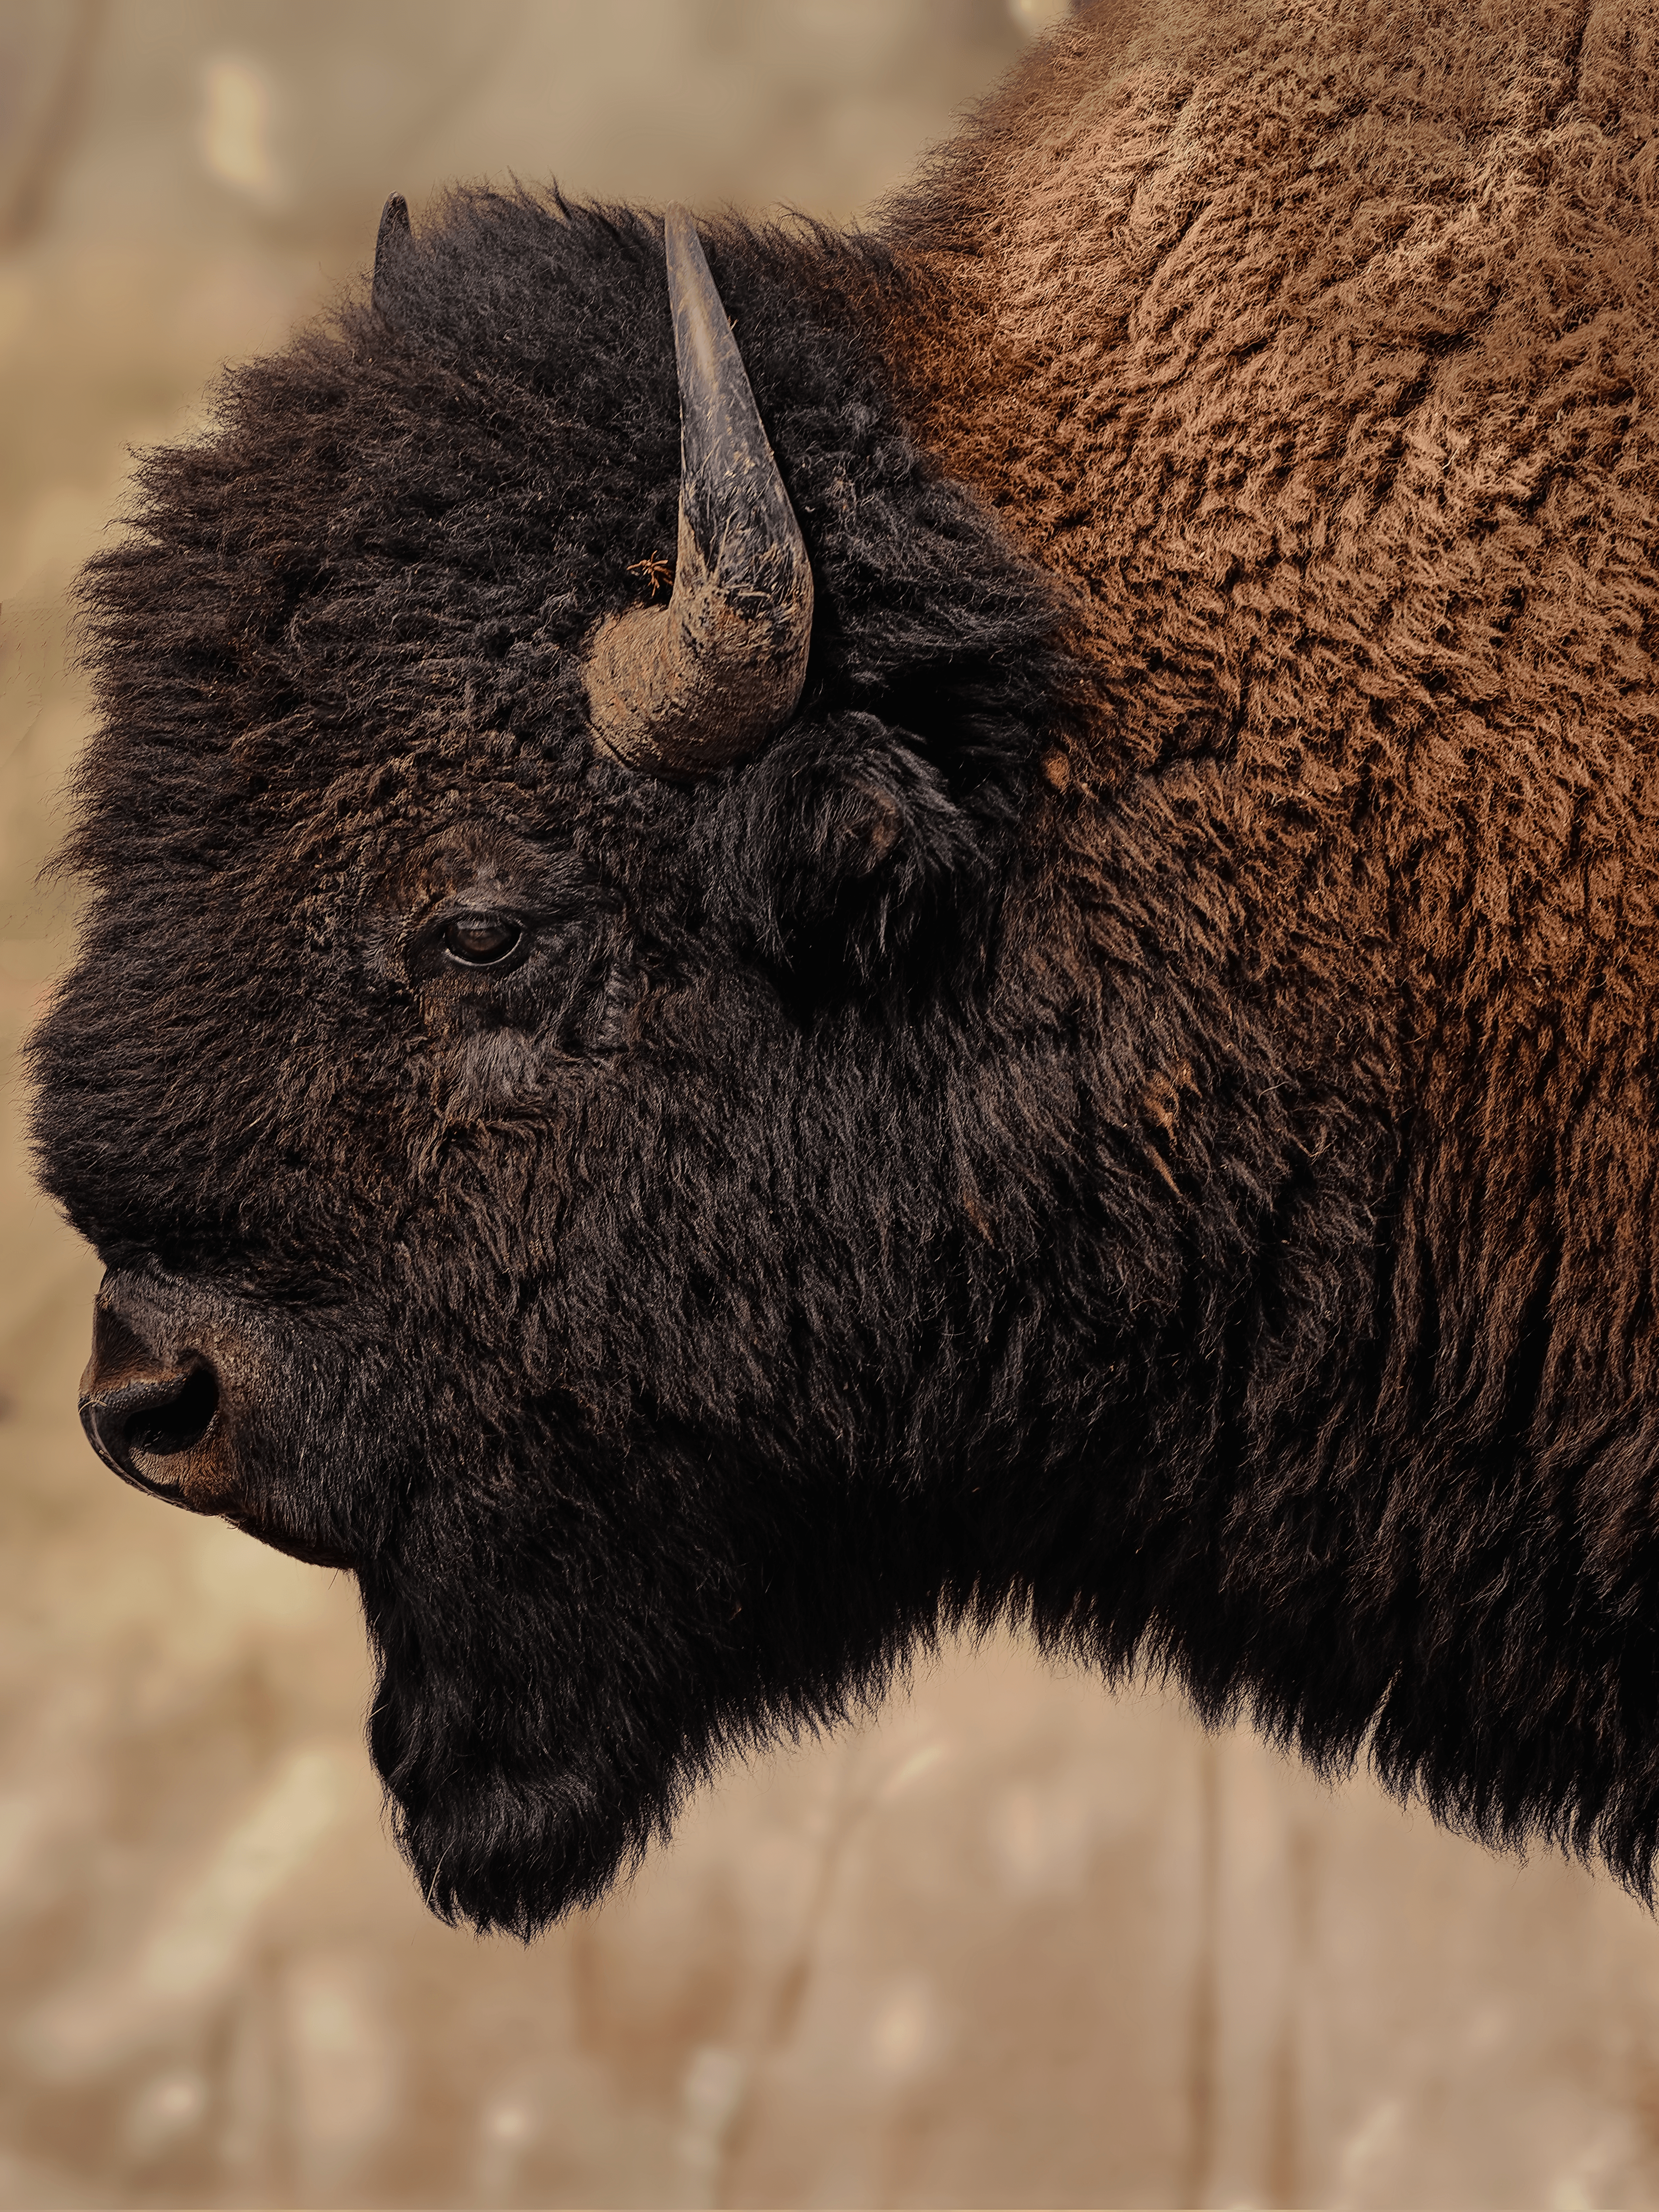 Yellowstone #0 - The Bison King